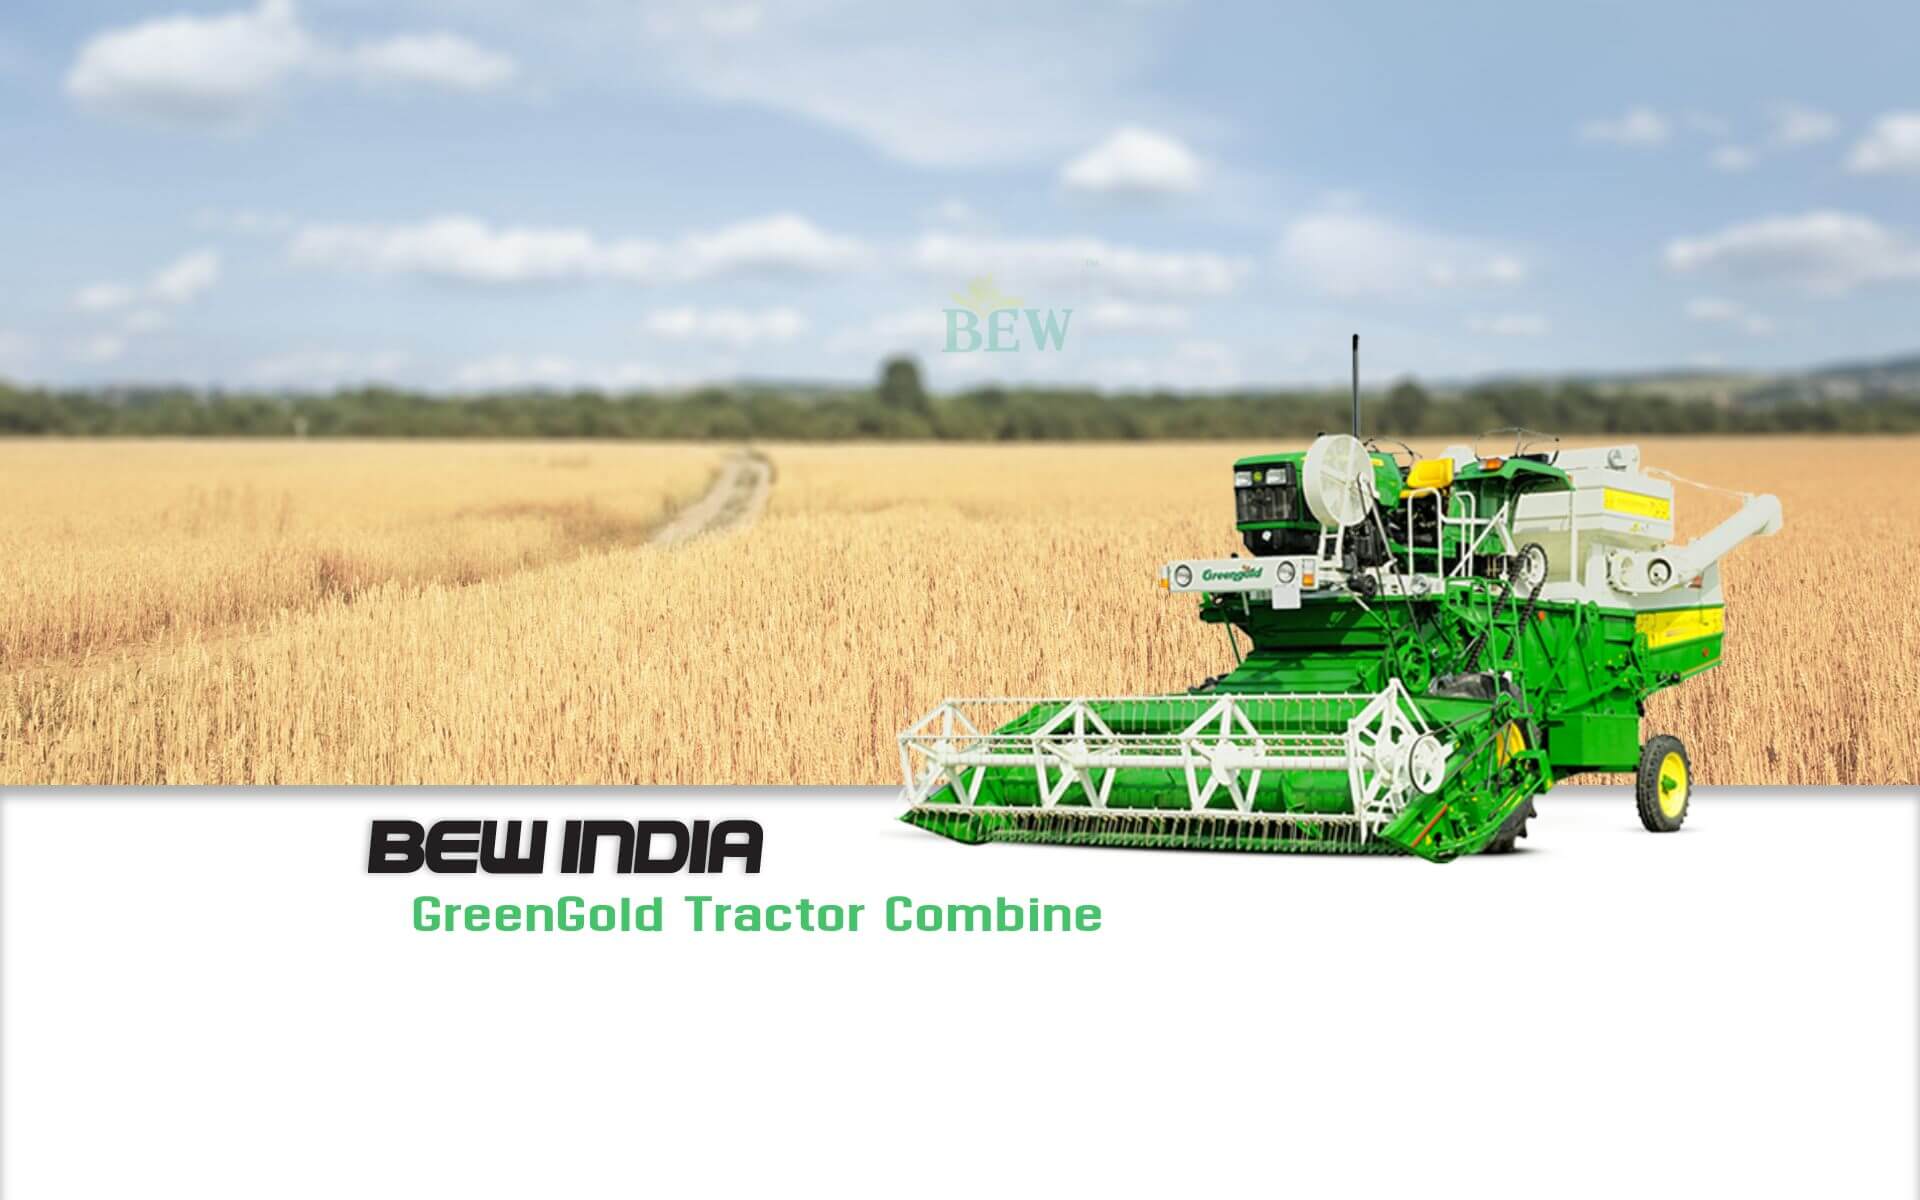 GREENGOLD TRACTOR COMBINE